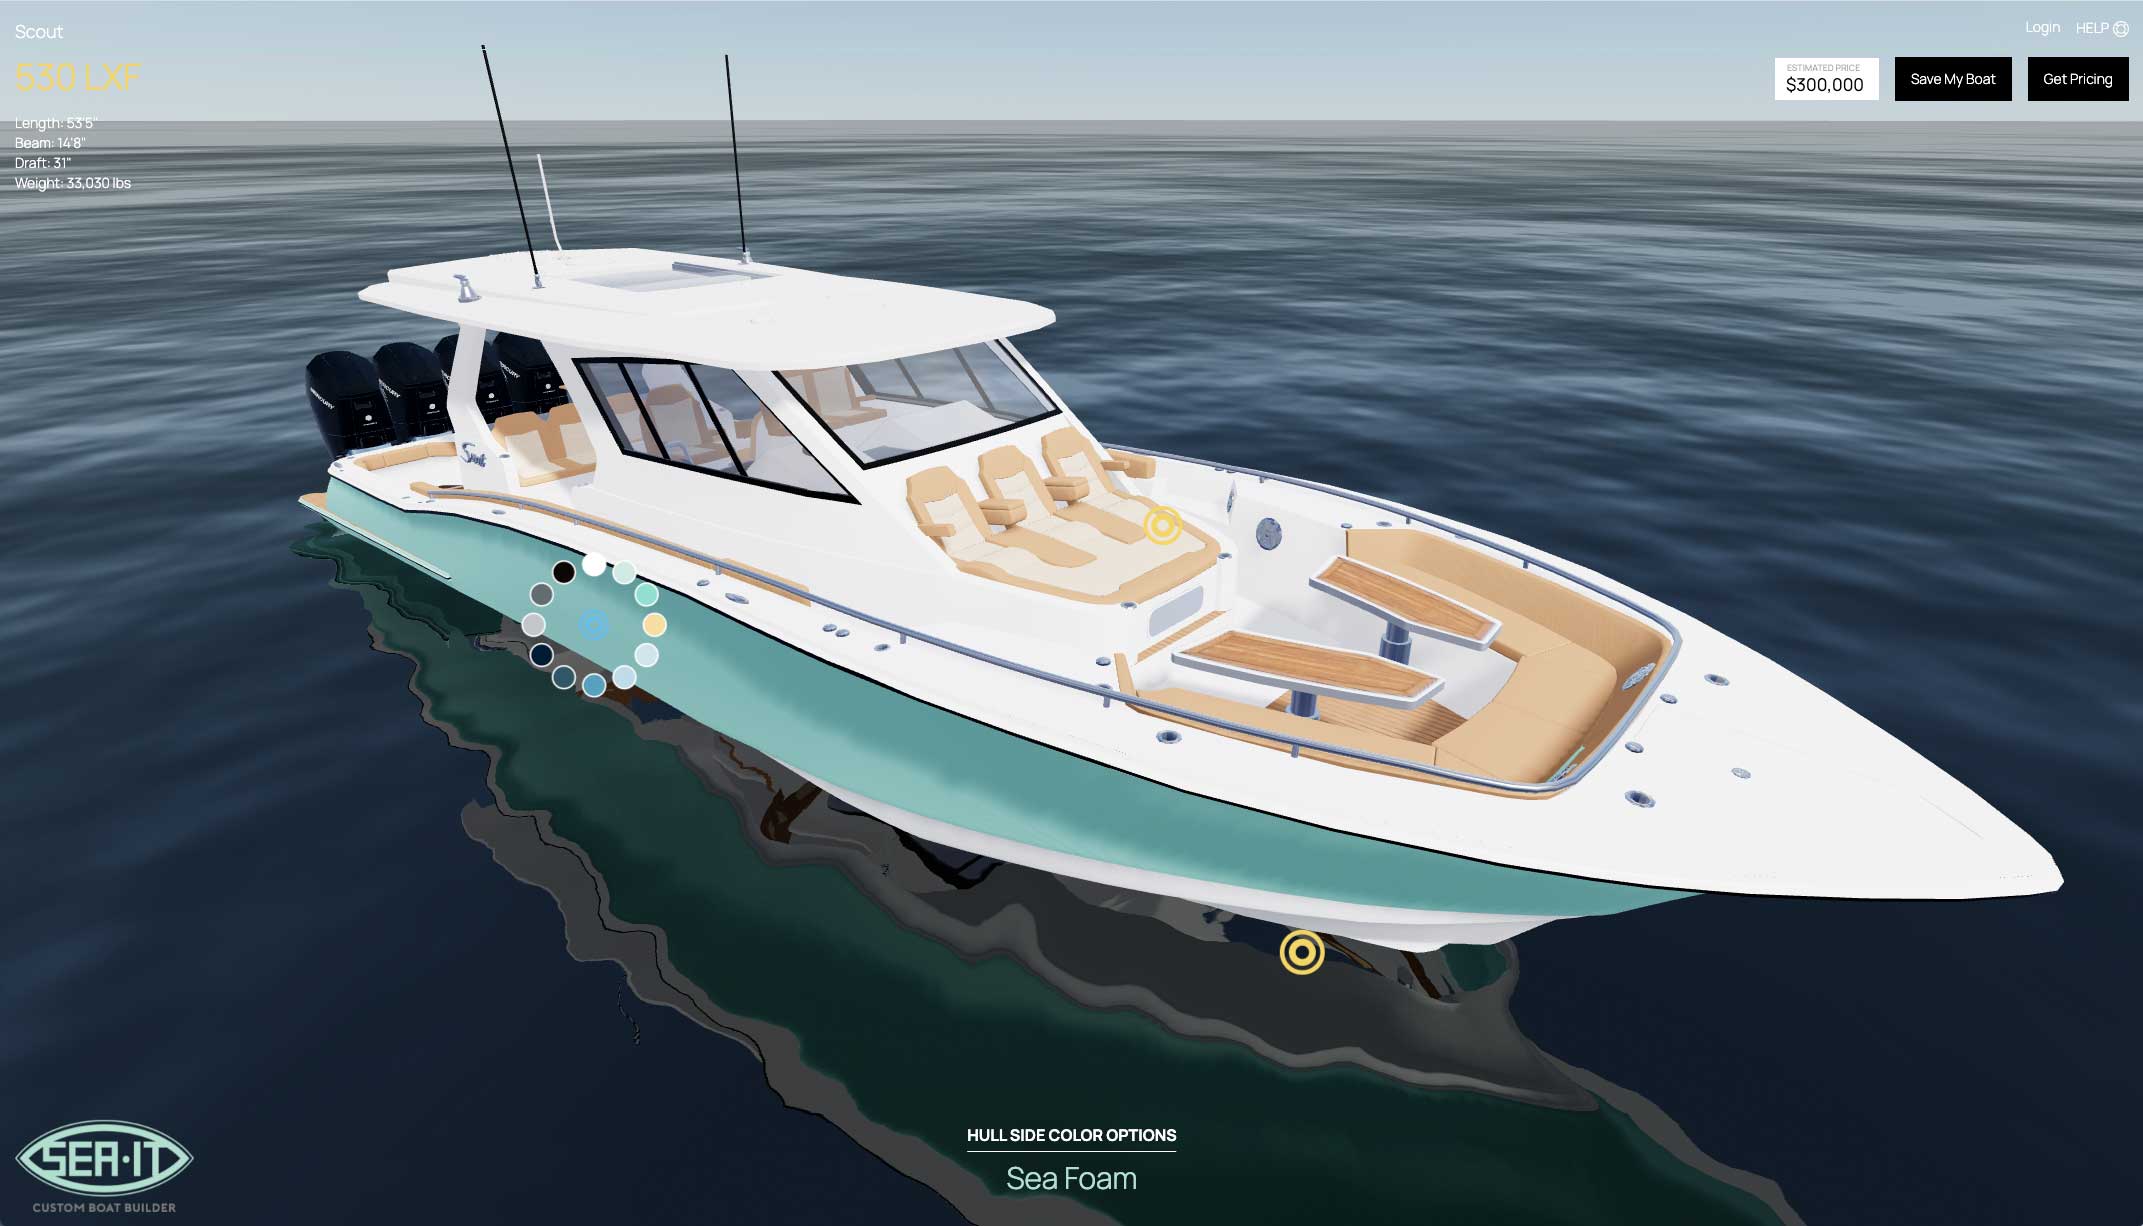 A view of the 3D boat visualization tool by Sea It, a boat visualization company